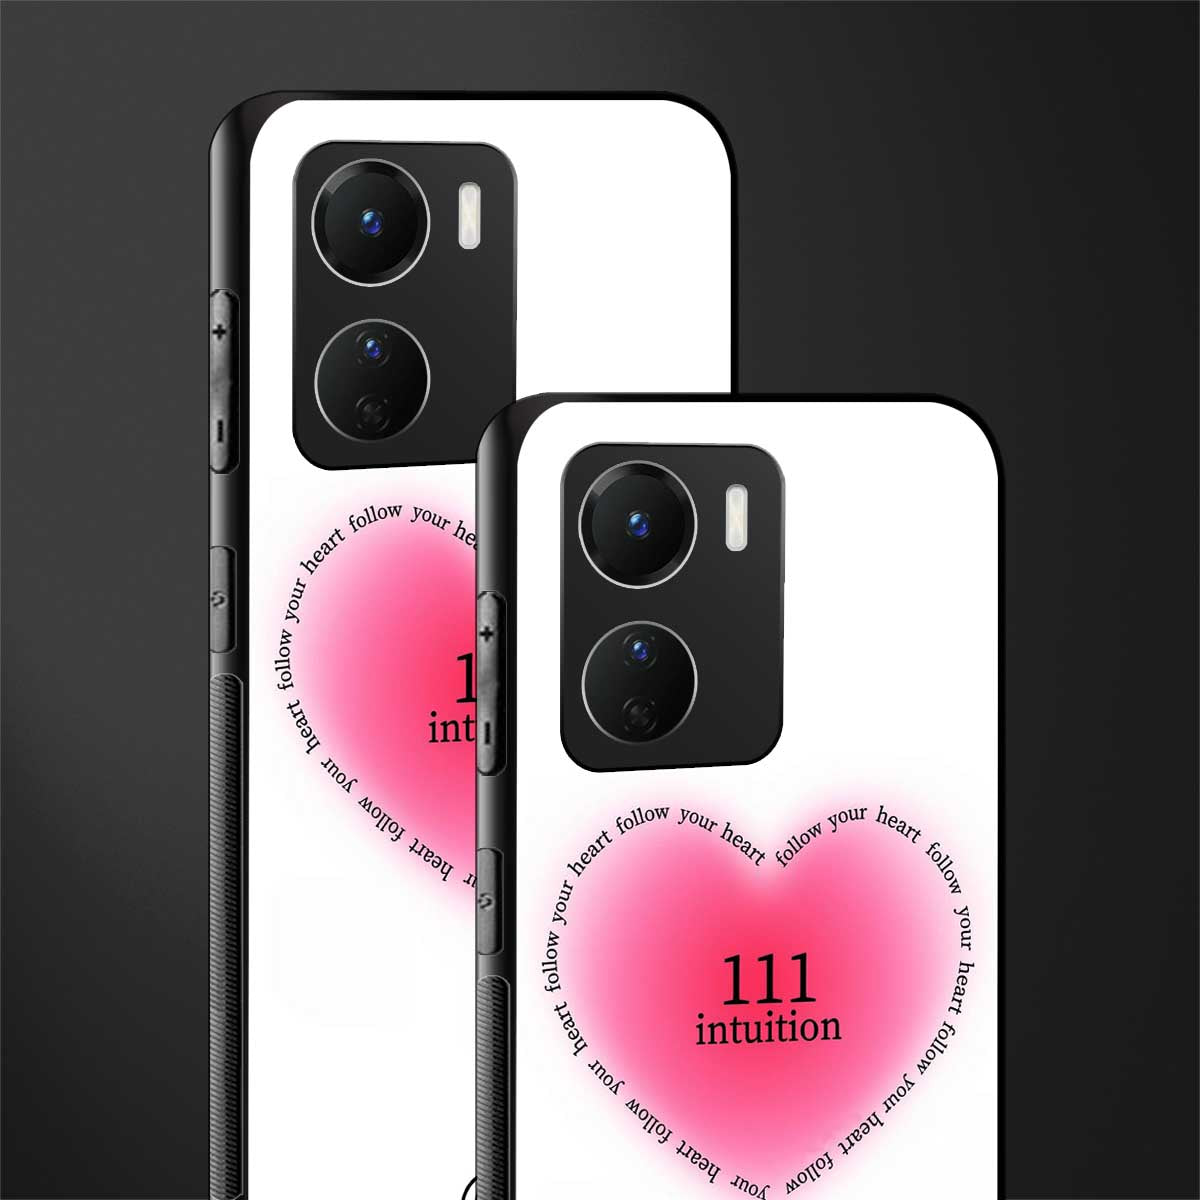 111 intuition back phone cover | glass case for vivo y16